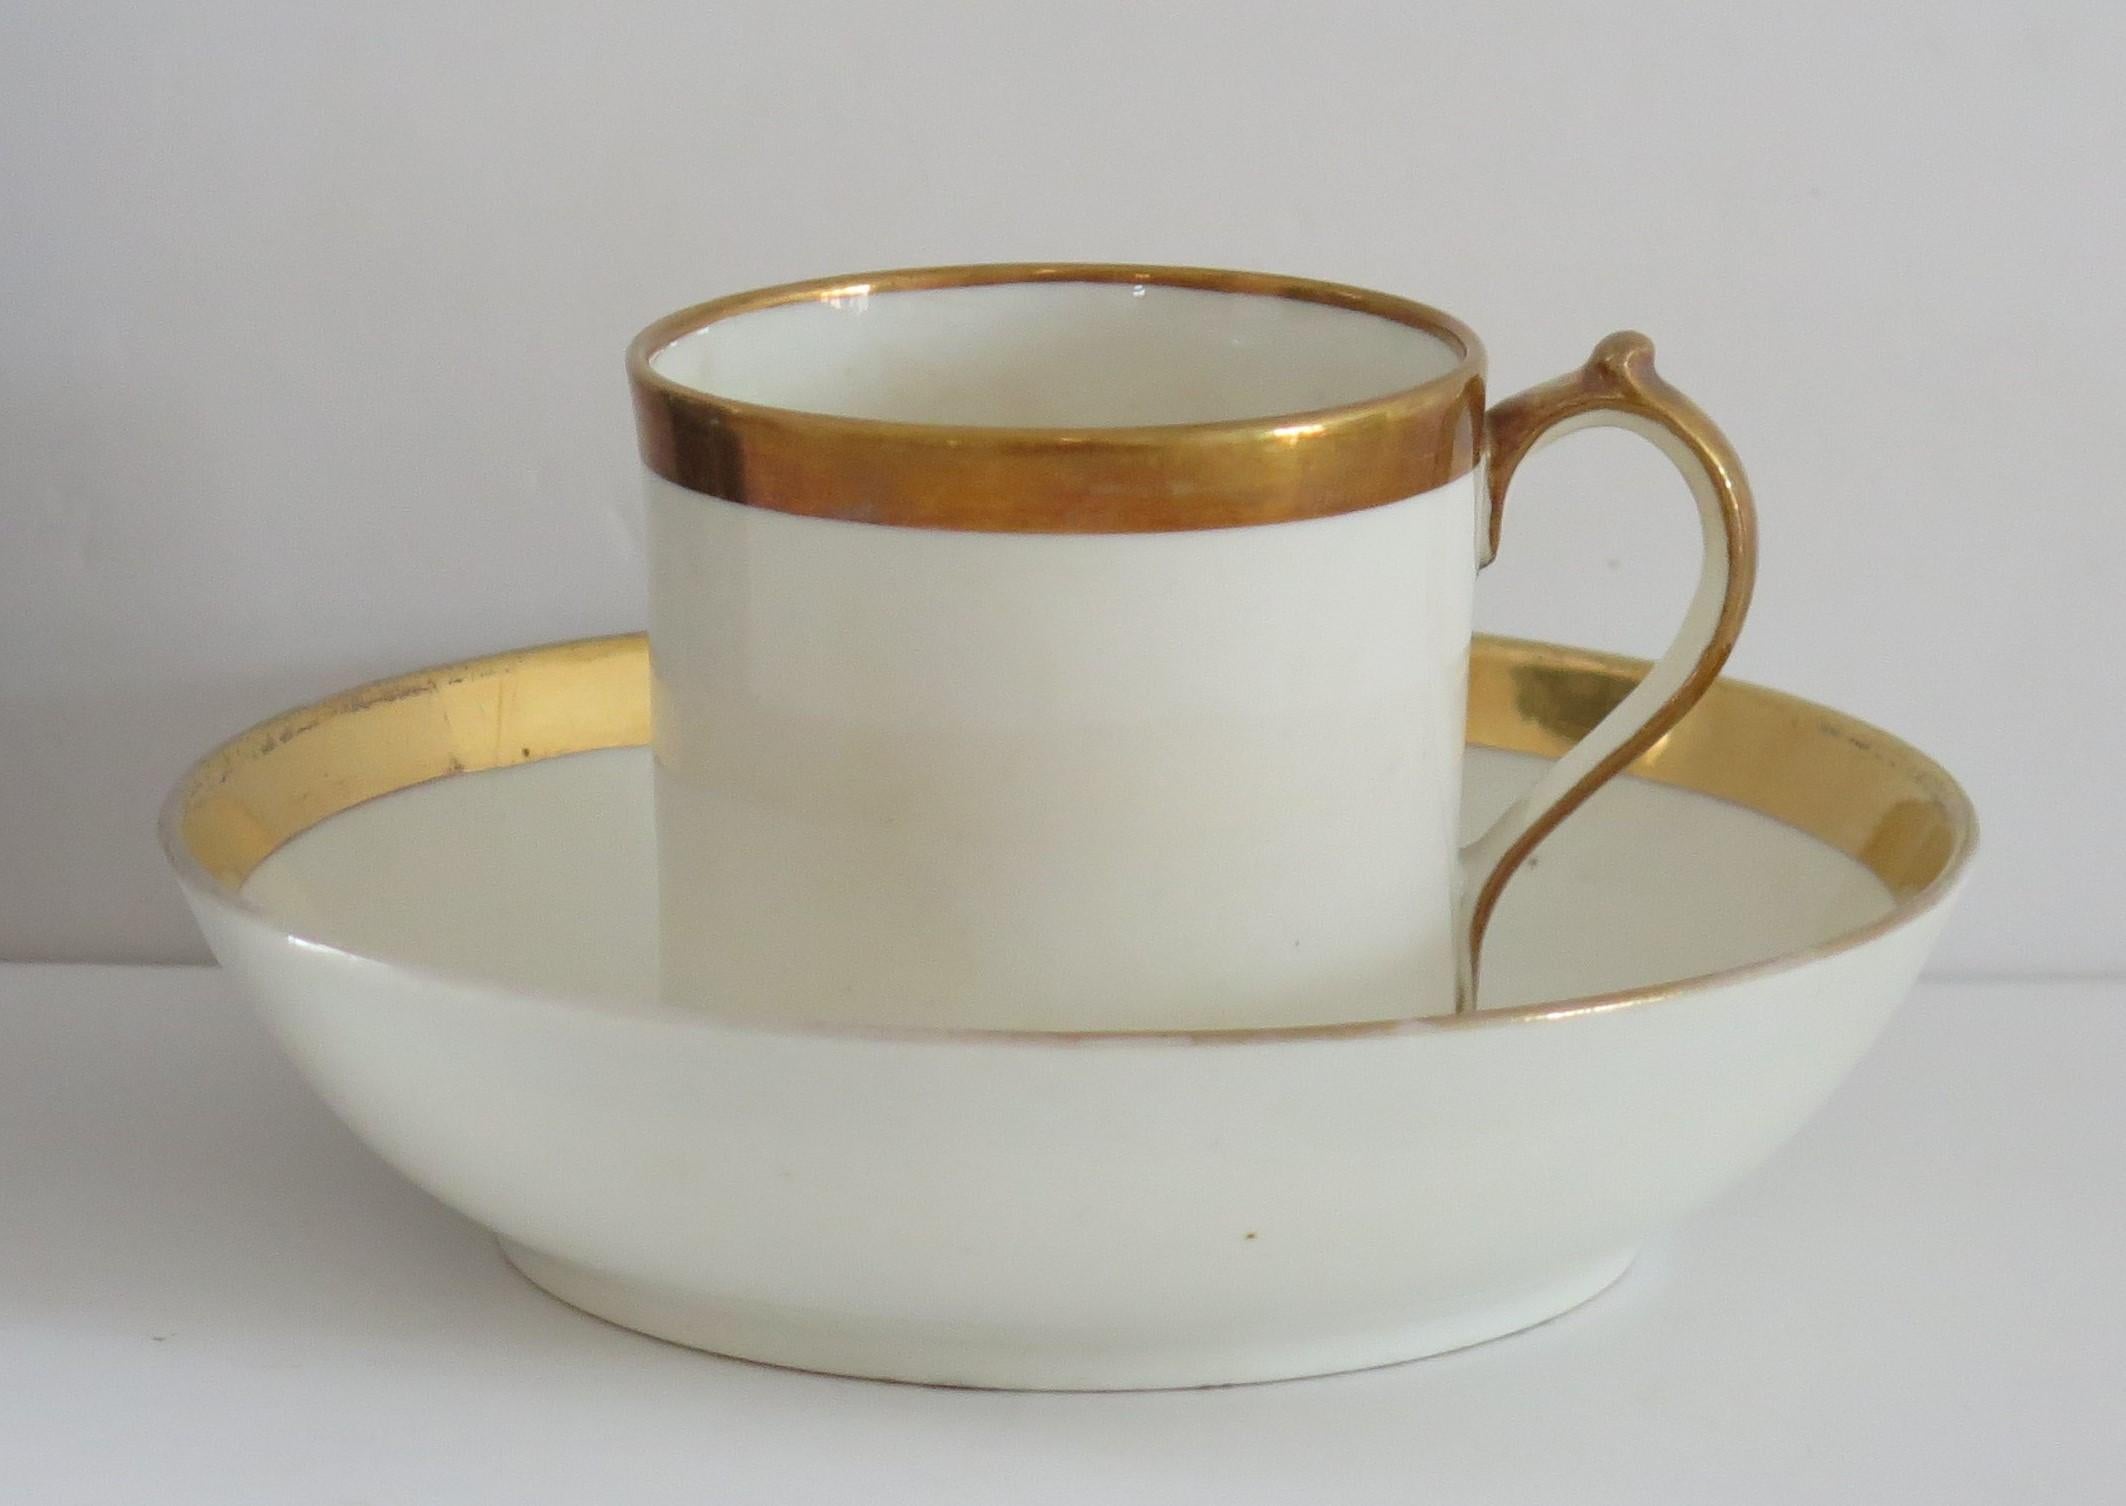 This is a fine porcelain coffee can & saucer duo made by Miles Mason, of Lane Delph, Stoke on Trent, England, circa 1805. It has a plain loop handle with the characteristic upper spur which is a known Miles Mason handle shape.

Miles Mason was the